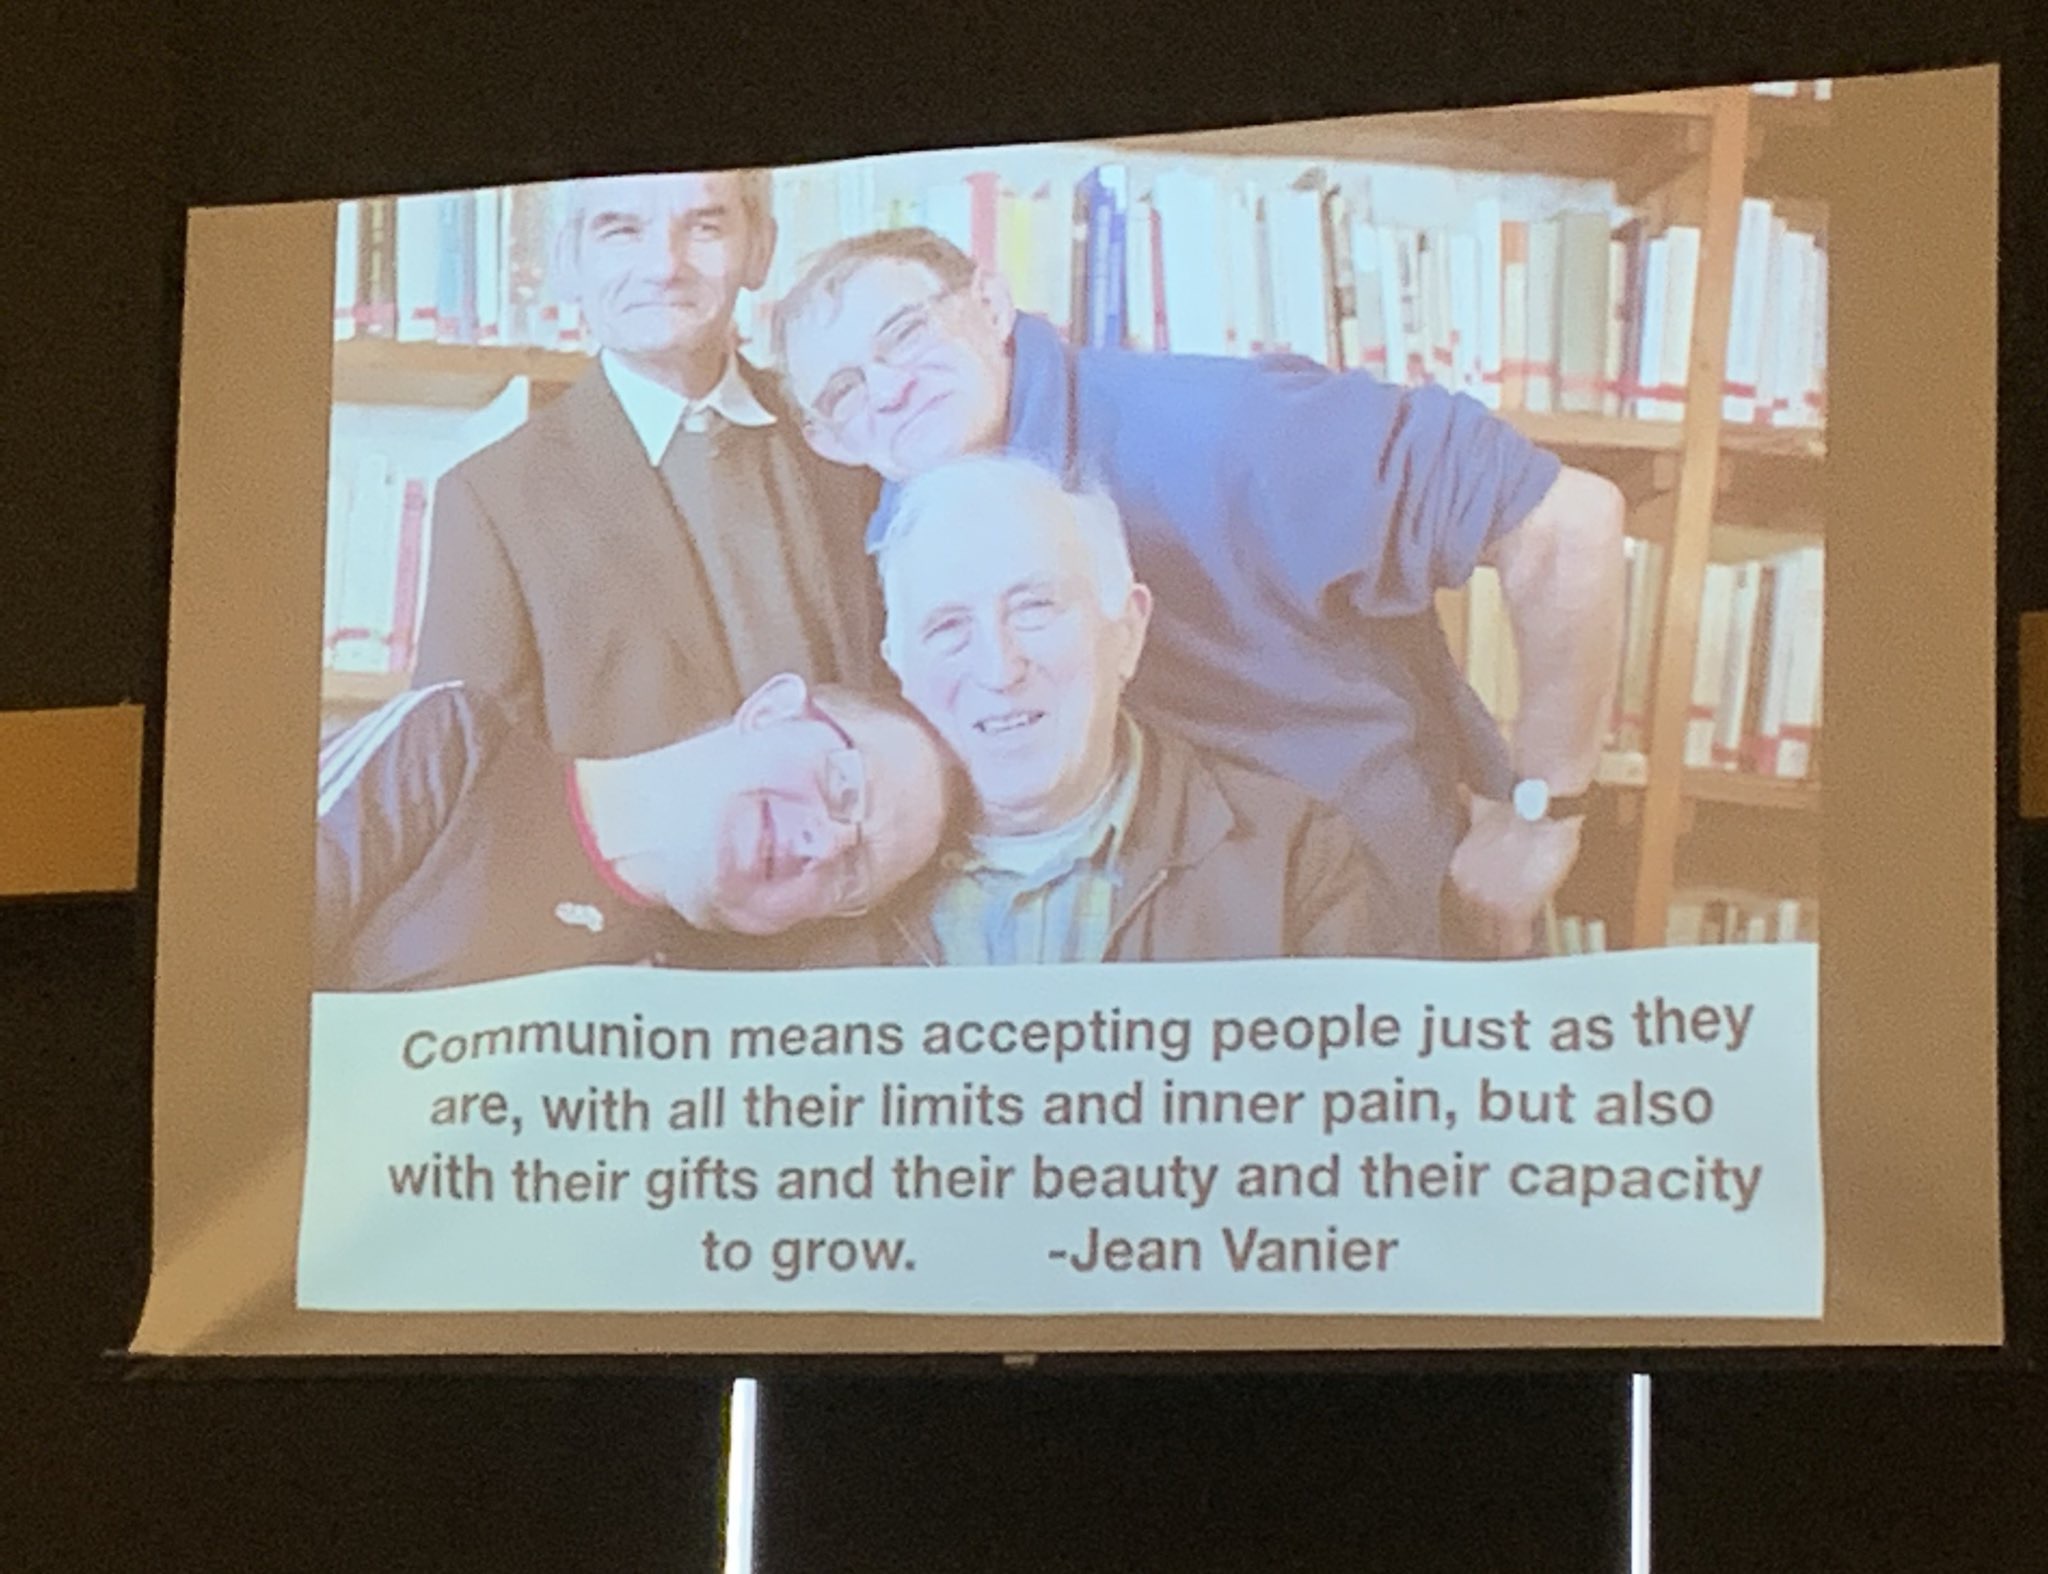 Communion means accepting people just as they are, with all their limits and inner pain, but also with their gifts and their beauty and their capacity to grow. - Jean Vanier